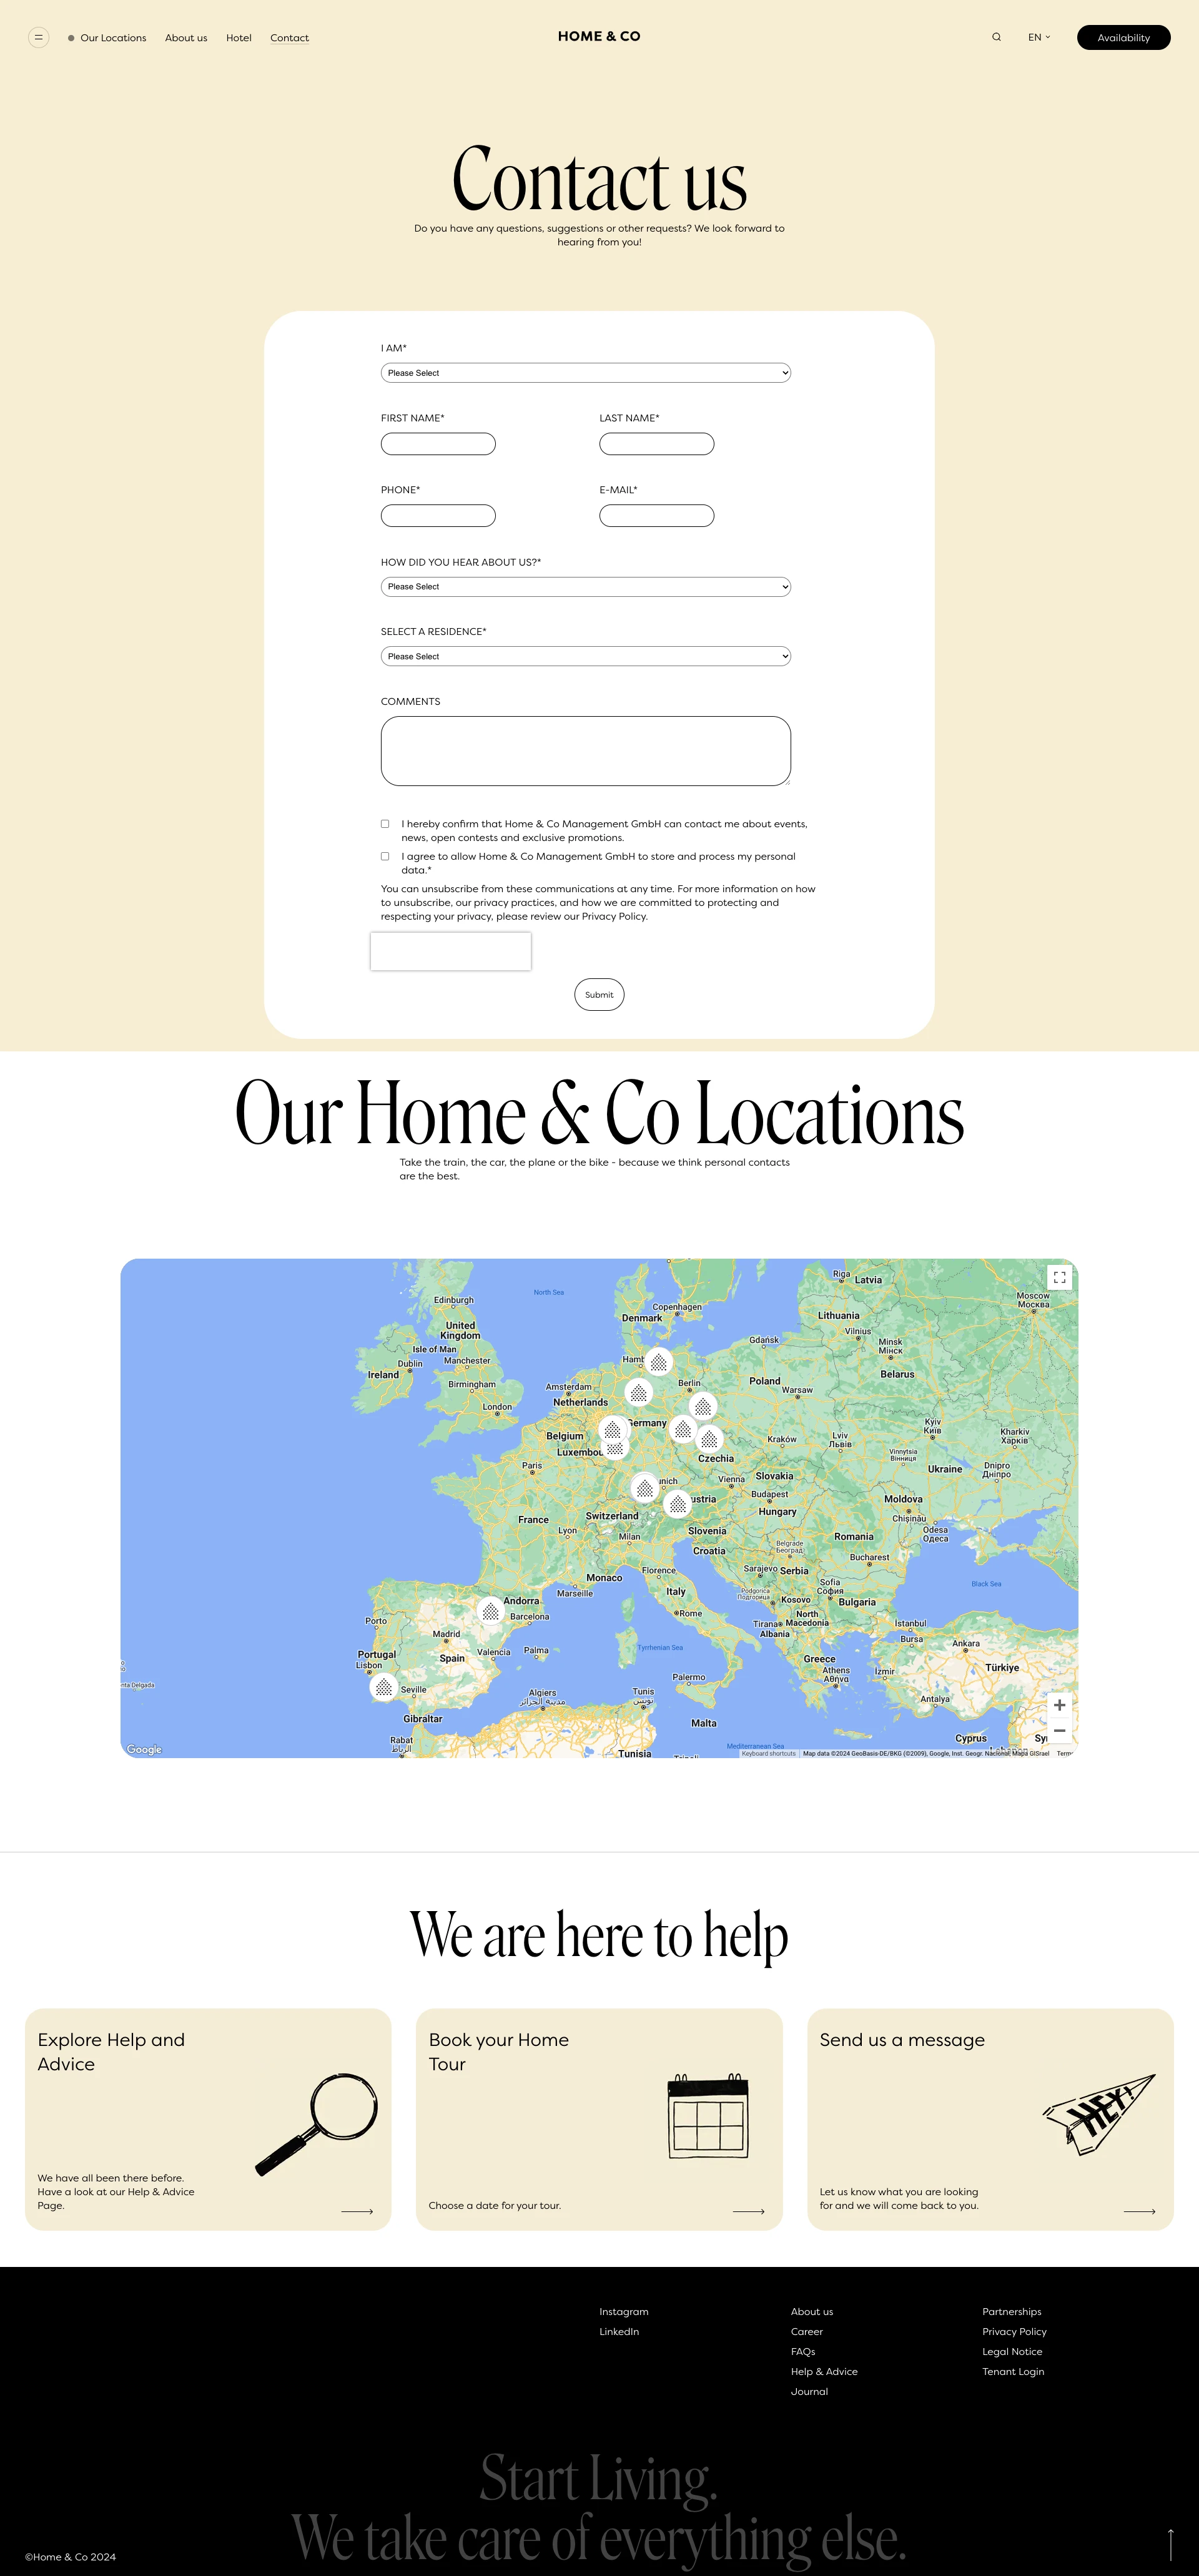 Home & Co Landing Page Example: Our cosy, furnished and smartly designed flats will make you feel right at home within an international, diverse coliving community of like-minded people. And if you want privacy, you will find it in your own flat or room. Explore Home & Co.